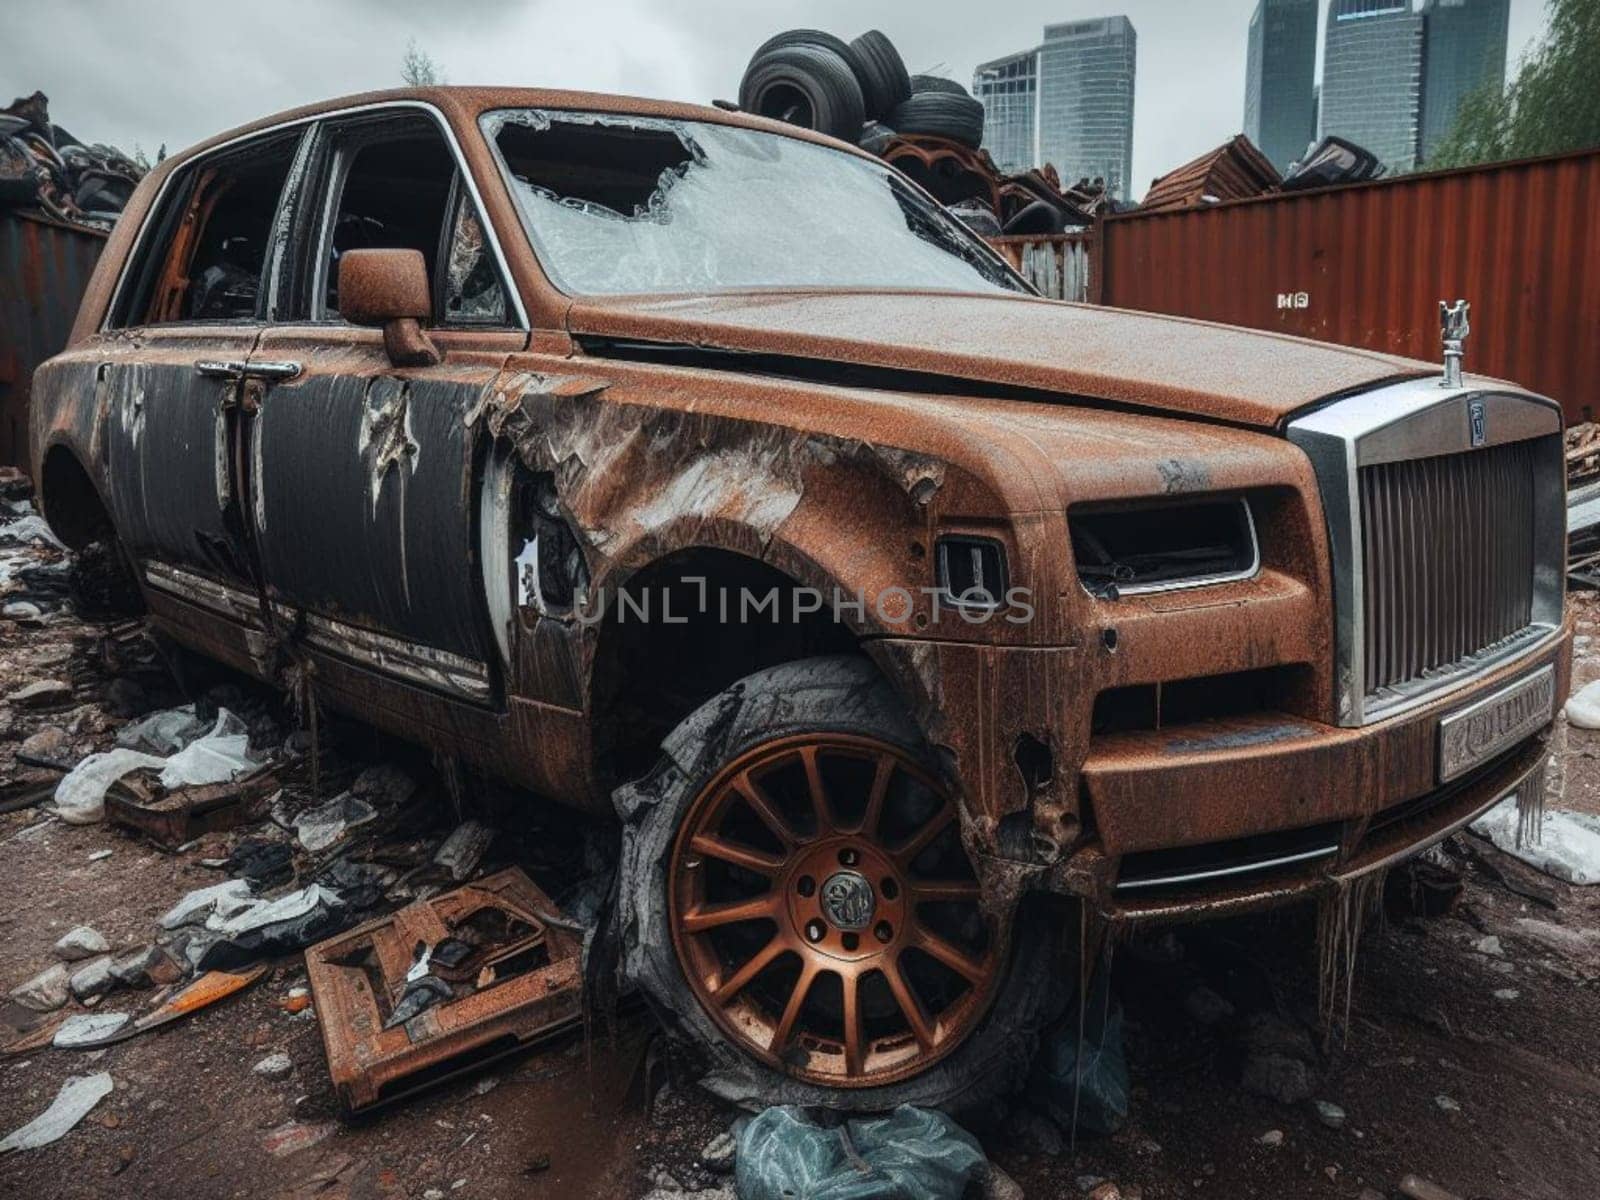 Crashed abandoned rusty expensive atmospheric suv as circulation banned for co2 emission 2030 agenda dystopian concept ai generated